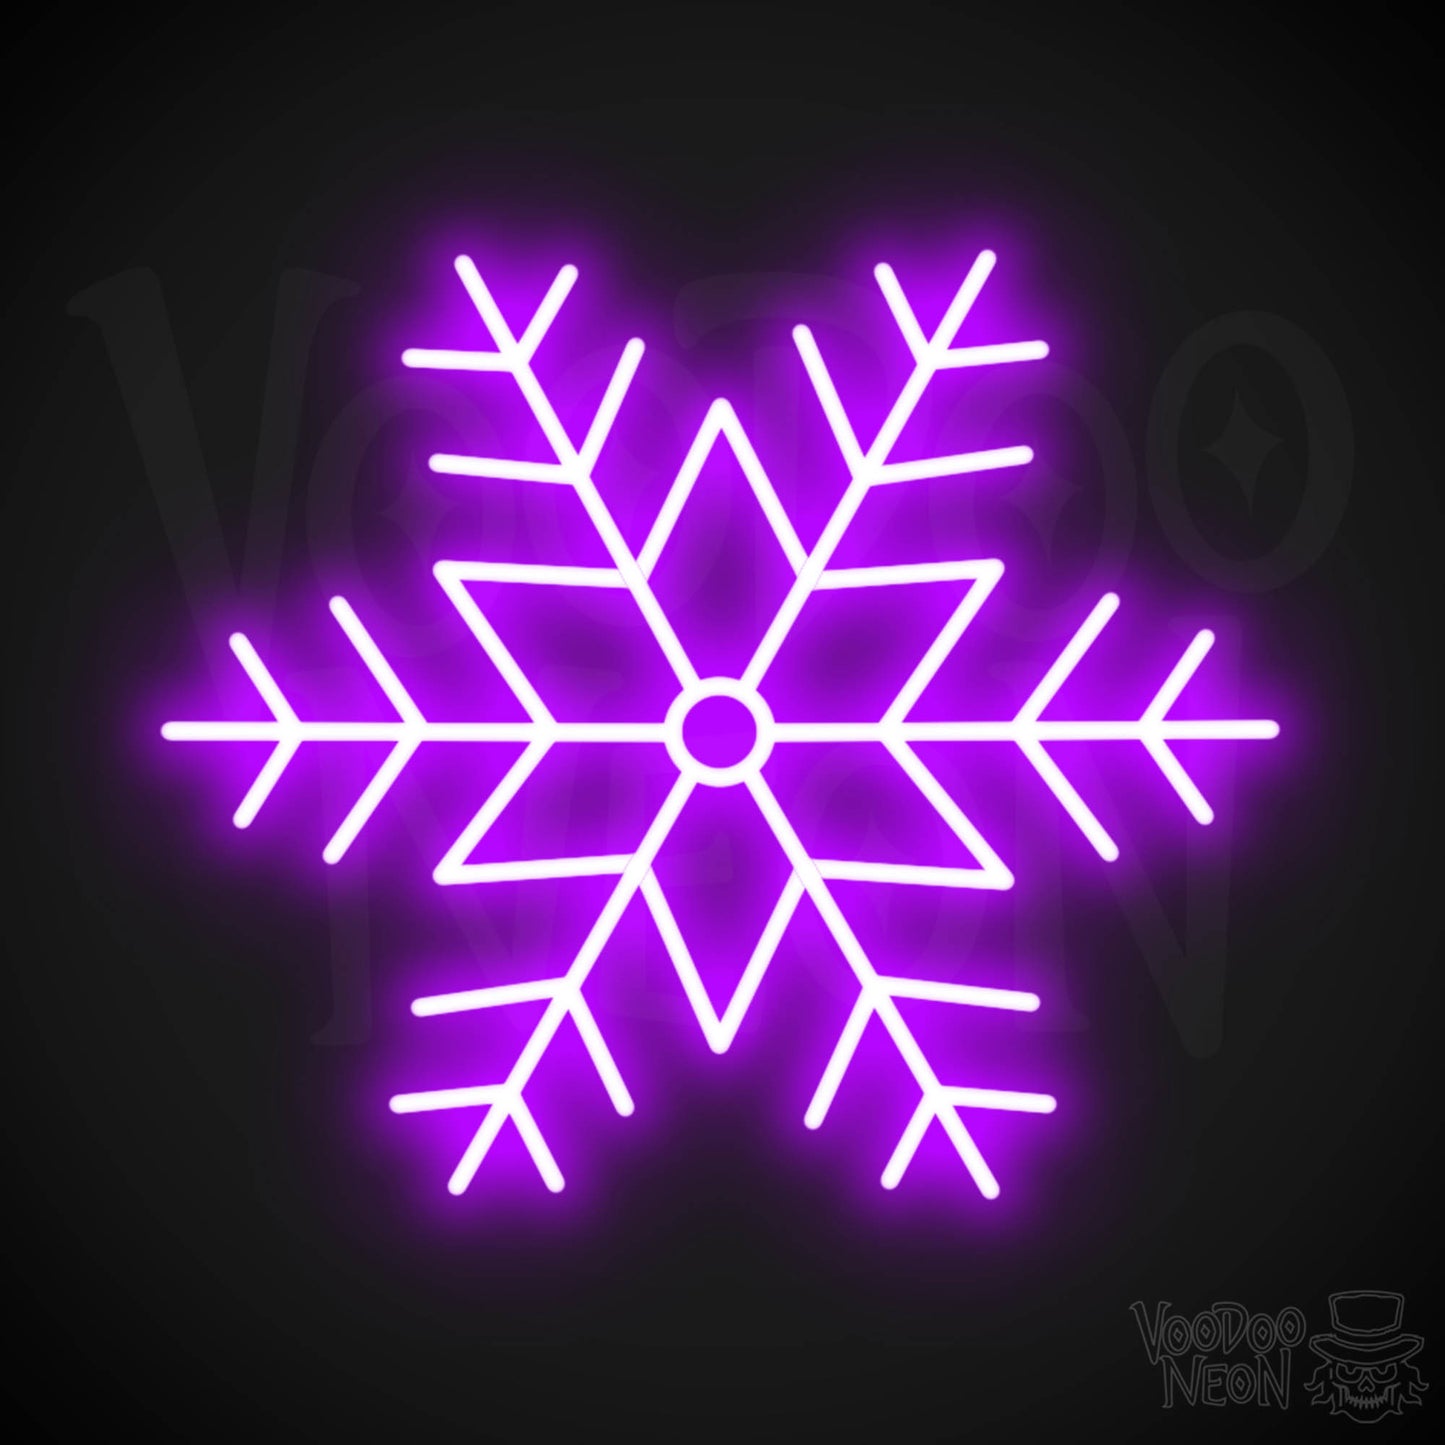 Snow Flakes Neon Sign - Neon Snow Flakes Sign - Xmas LED Wall Art - Color Purple